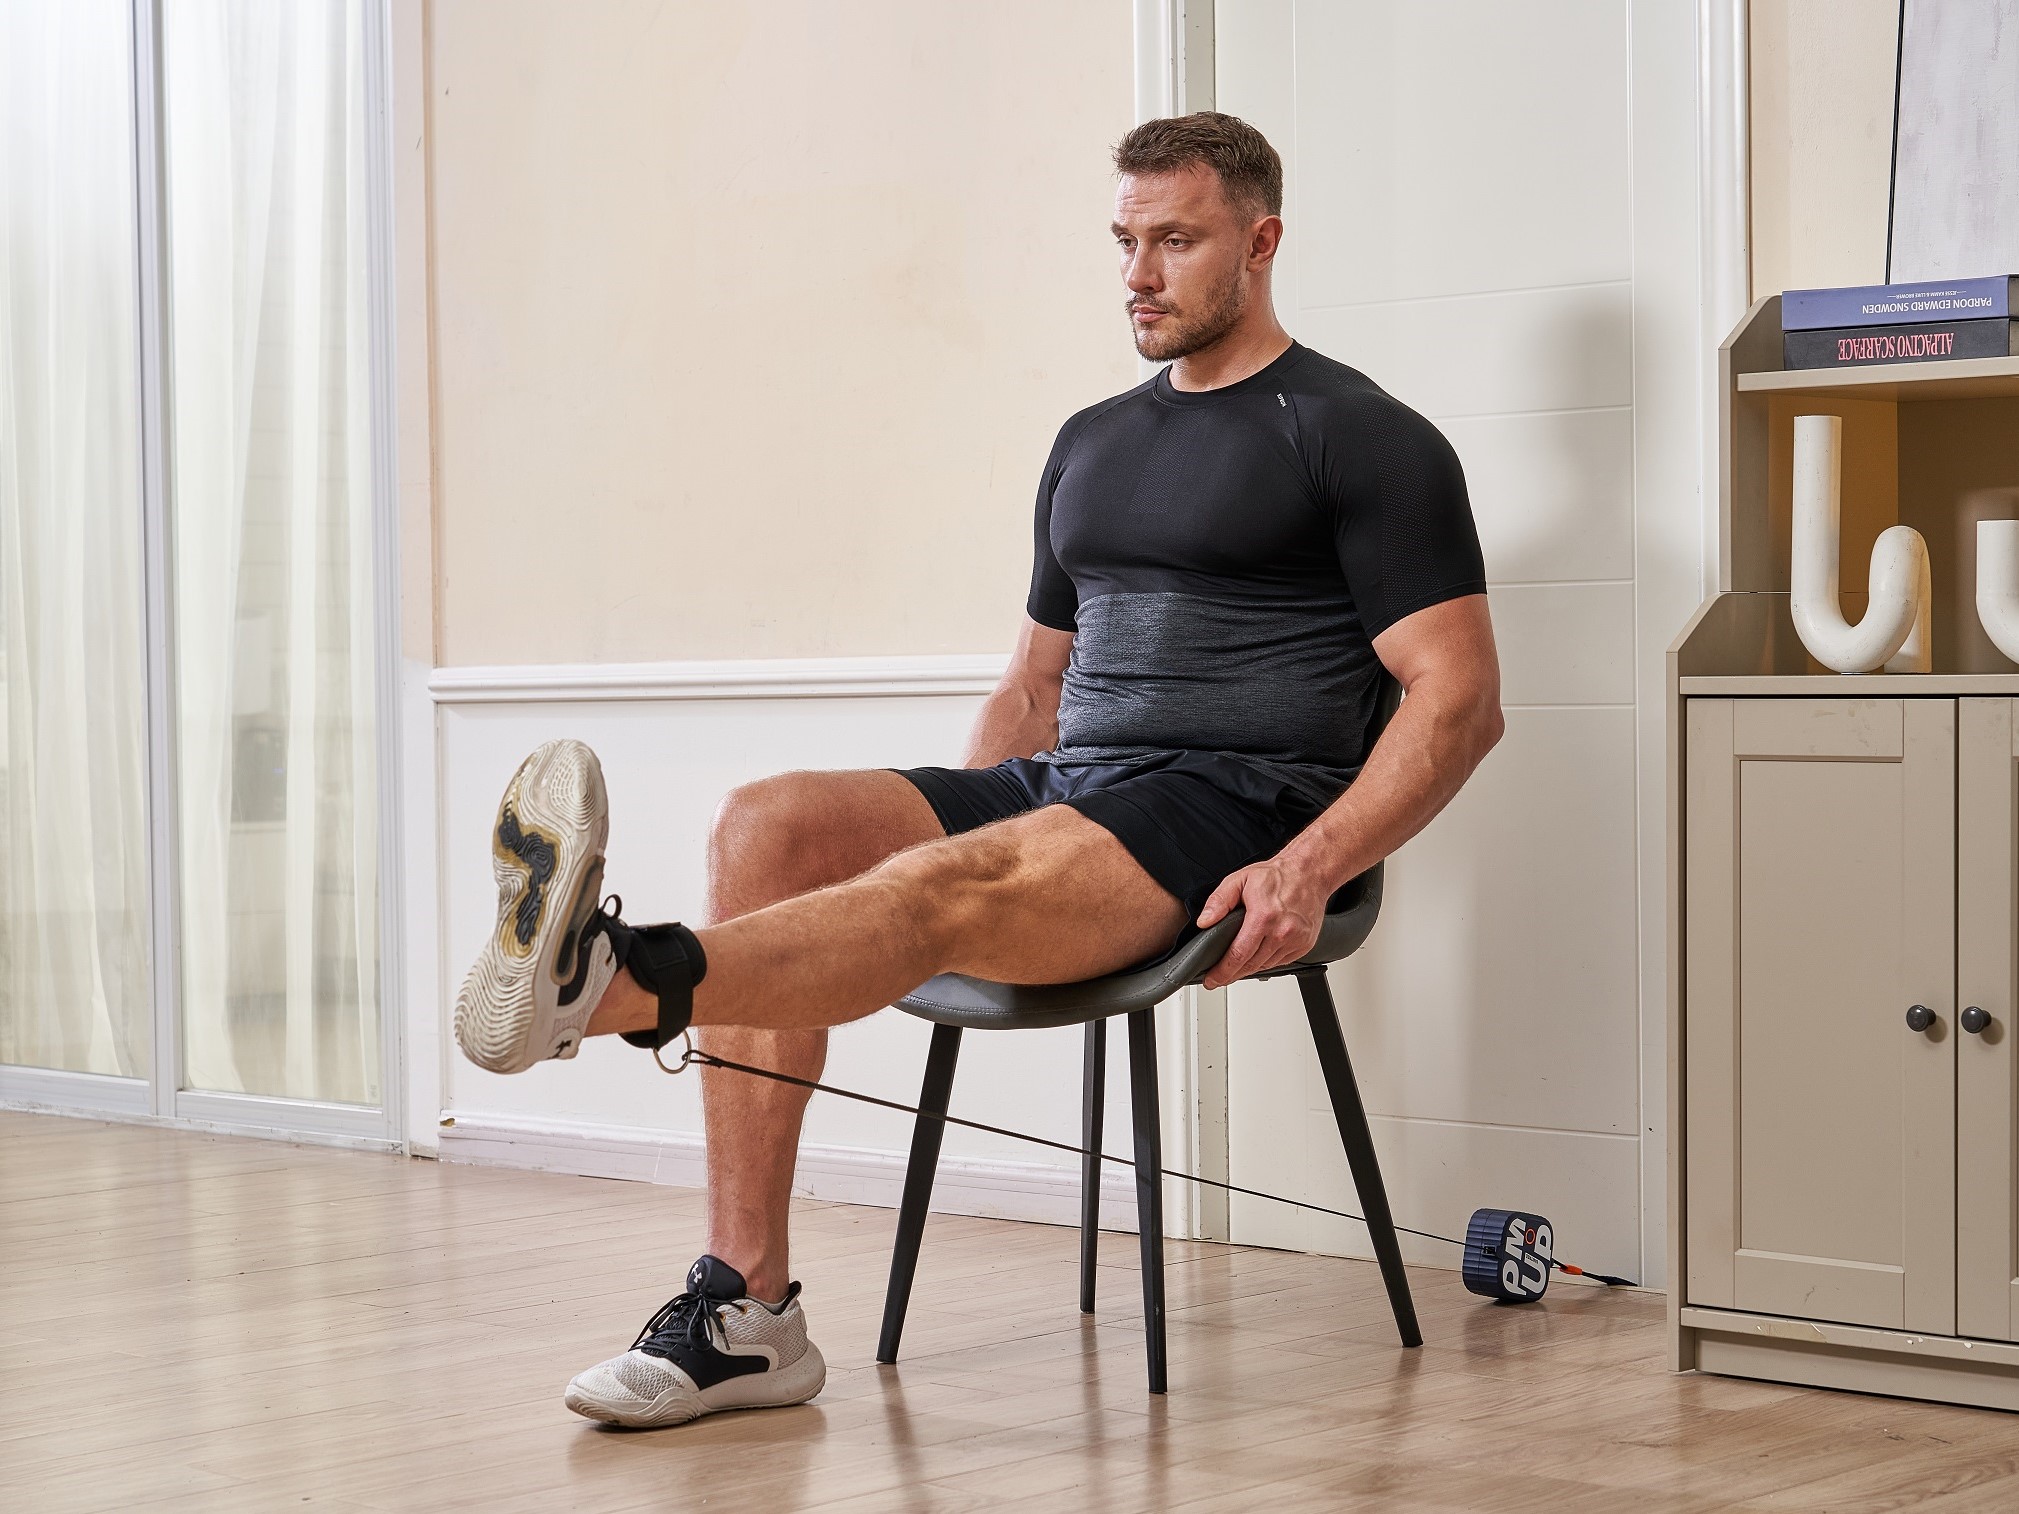 Seated Strength and Cardio Chair Workout for Quads, Hamstrings, and Core